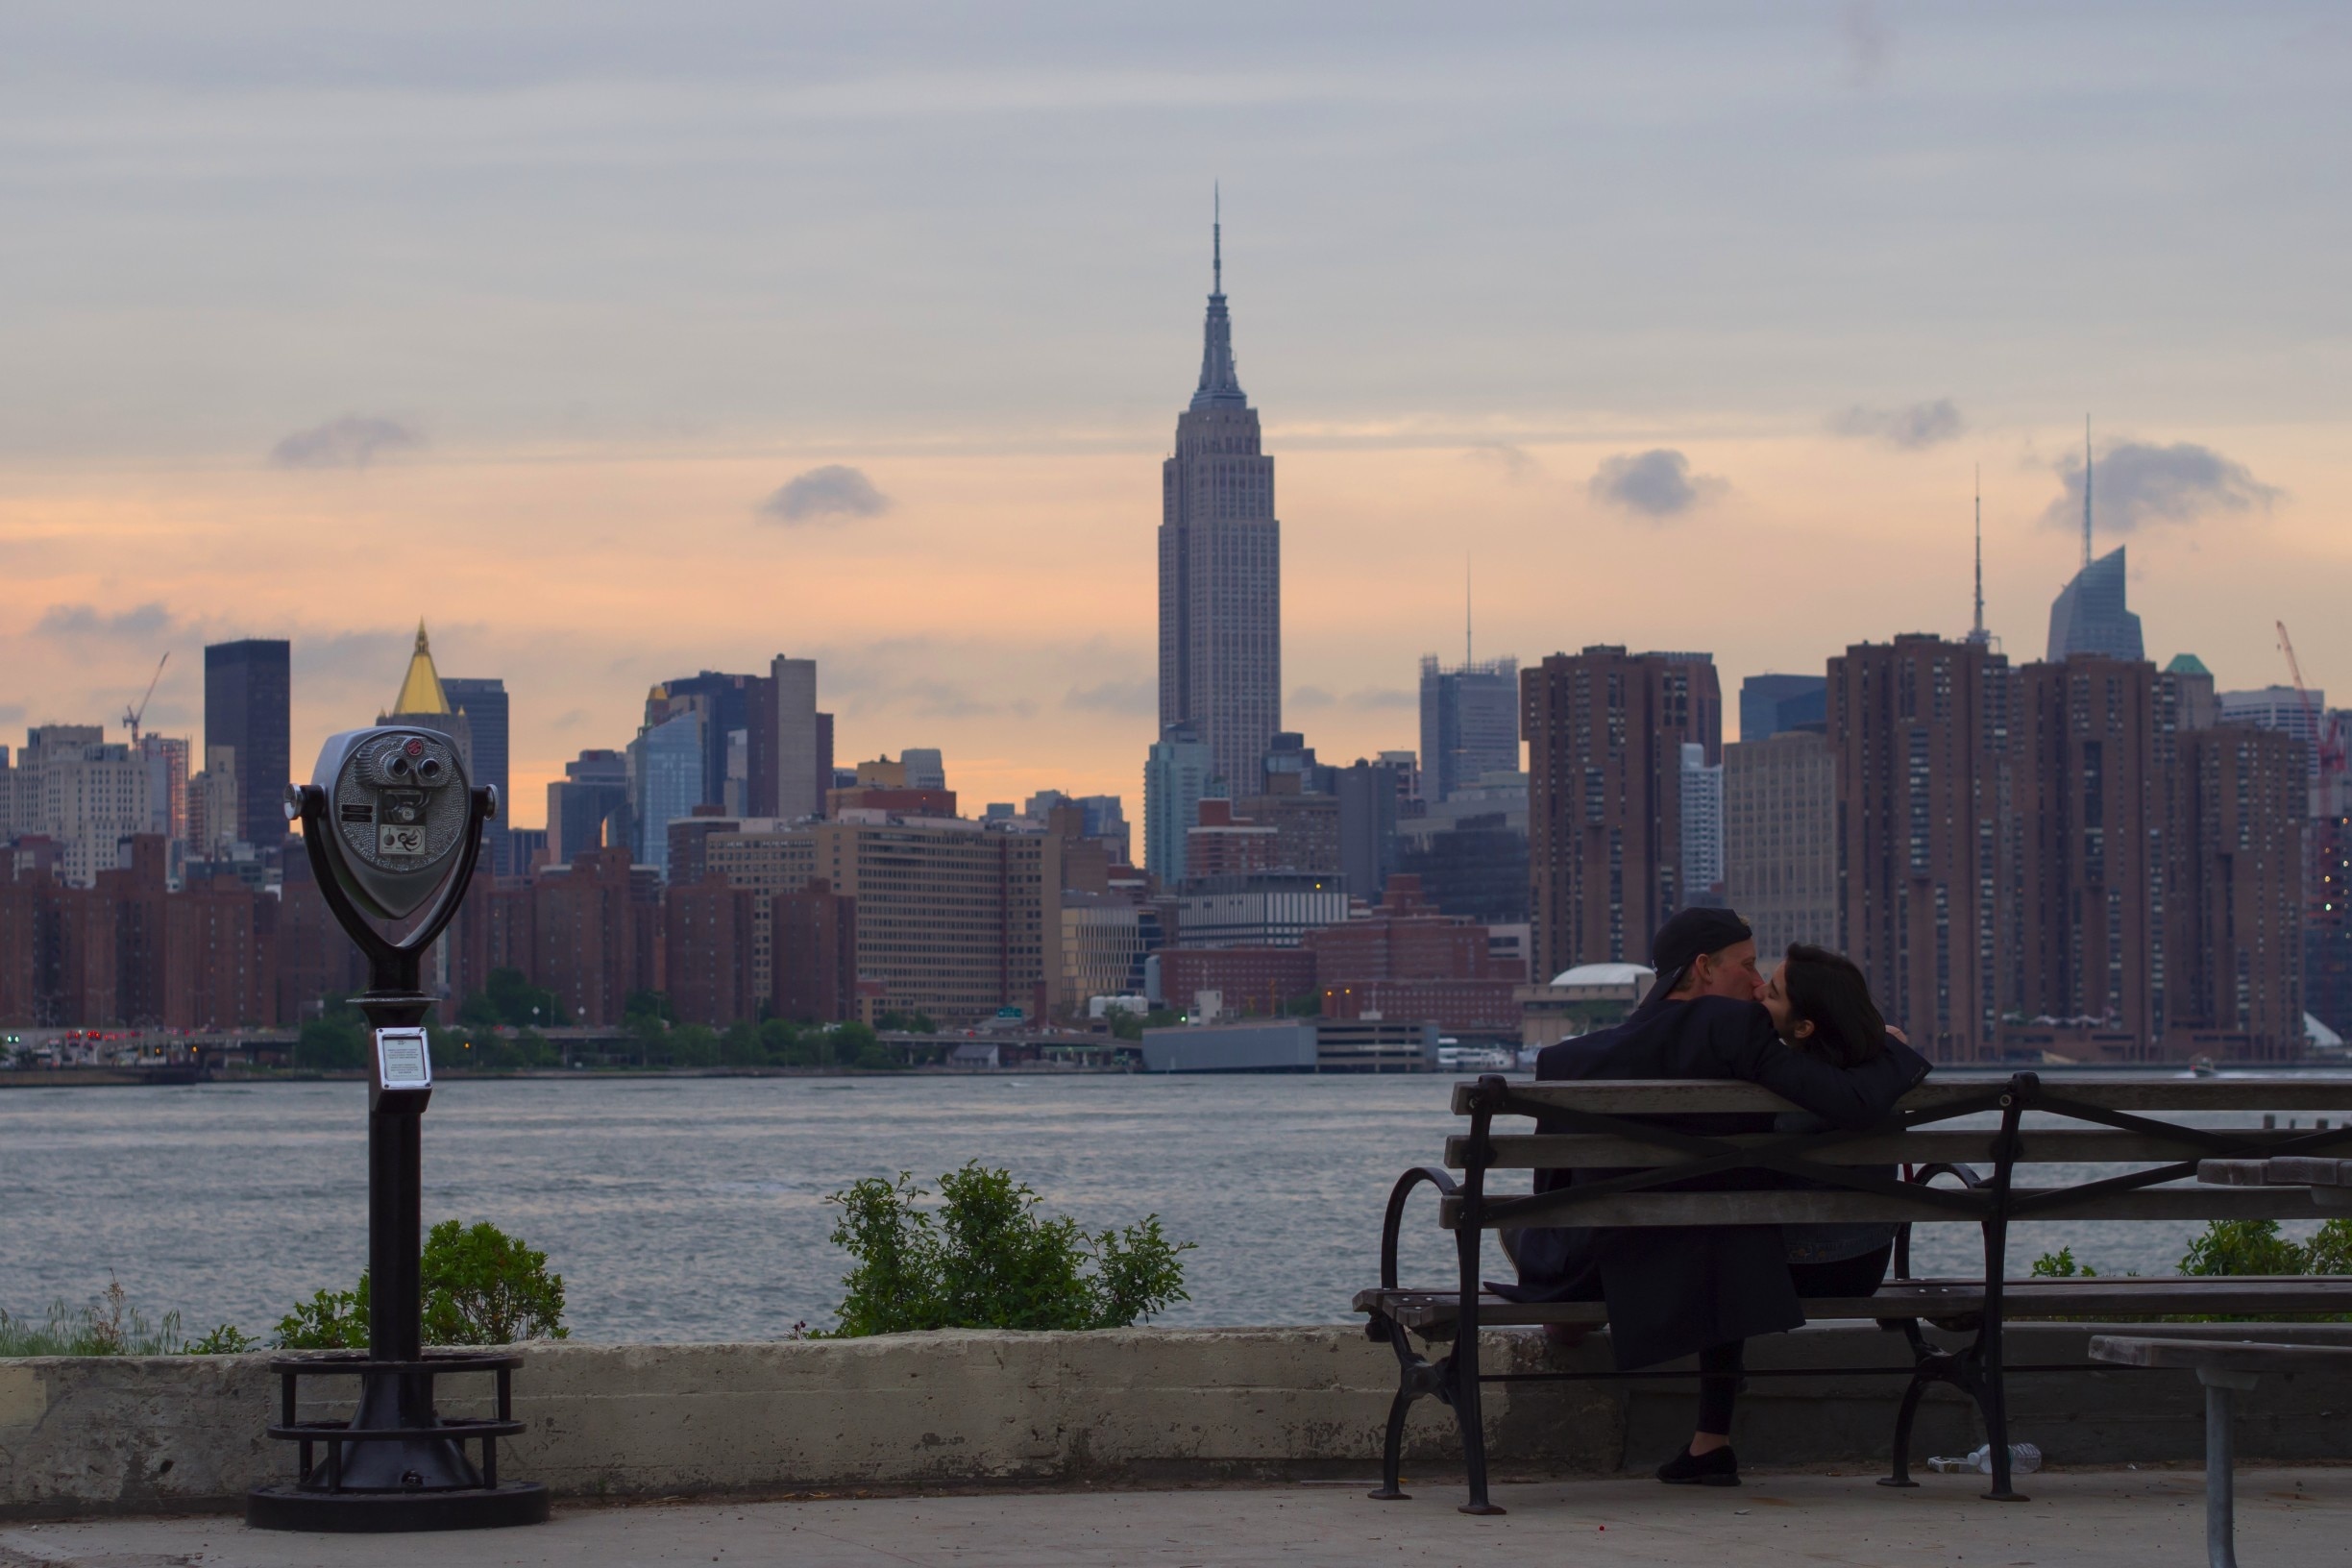 Lovers watching sunset with Empire State Building on the background in the East River State Park in Williamsburg, Brooklyn.
#LikeALocal